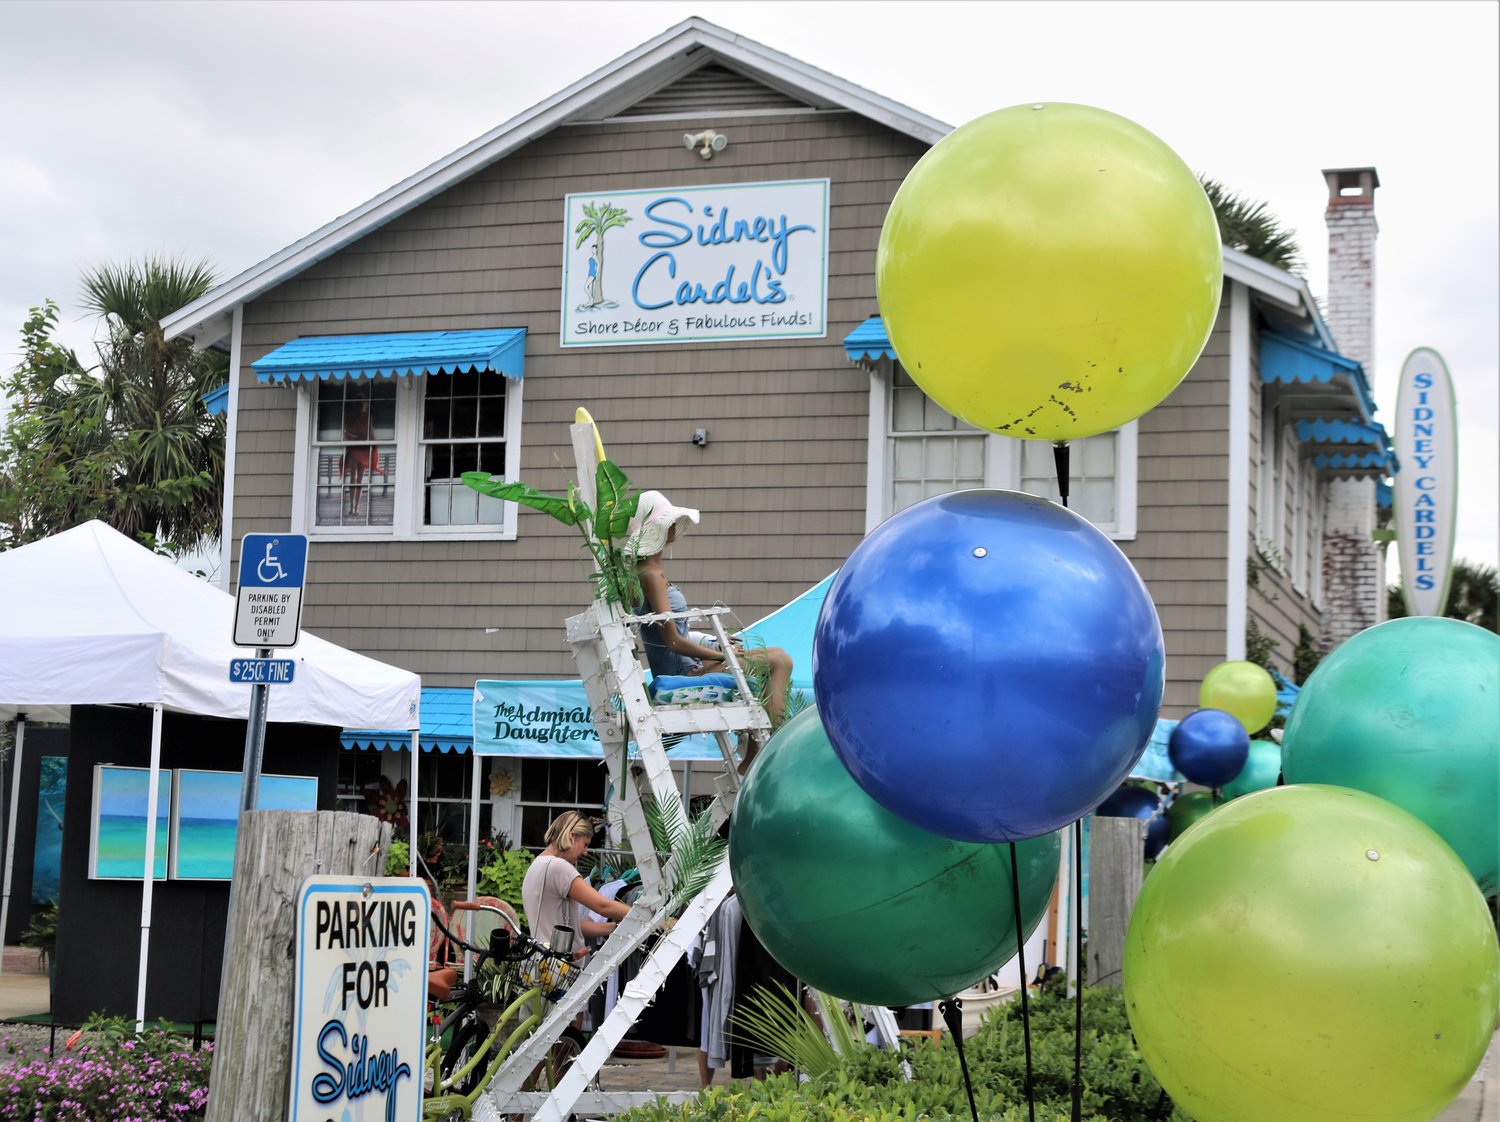 The Jacksonville Beach shops of Fourth and Fifth Street South united Saturday, Oct. 12, to host the first Coastal Collective Market, featuring store specials and the celebration of Sidney Cardel’s eight-year anniversary.